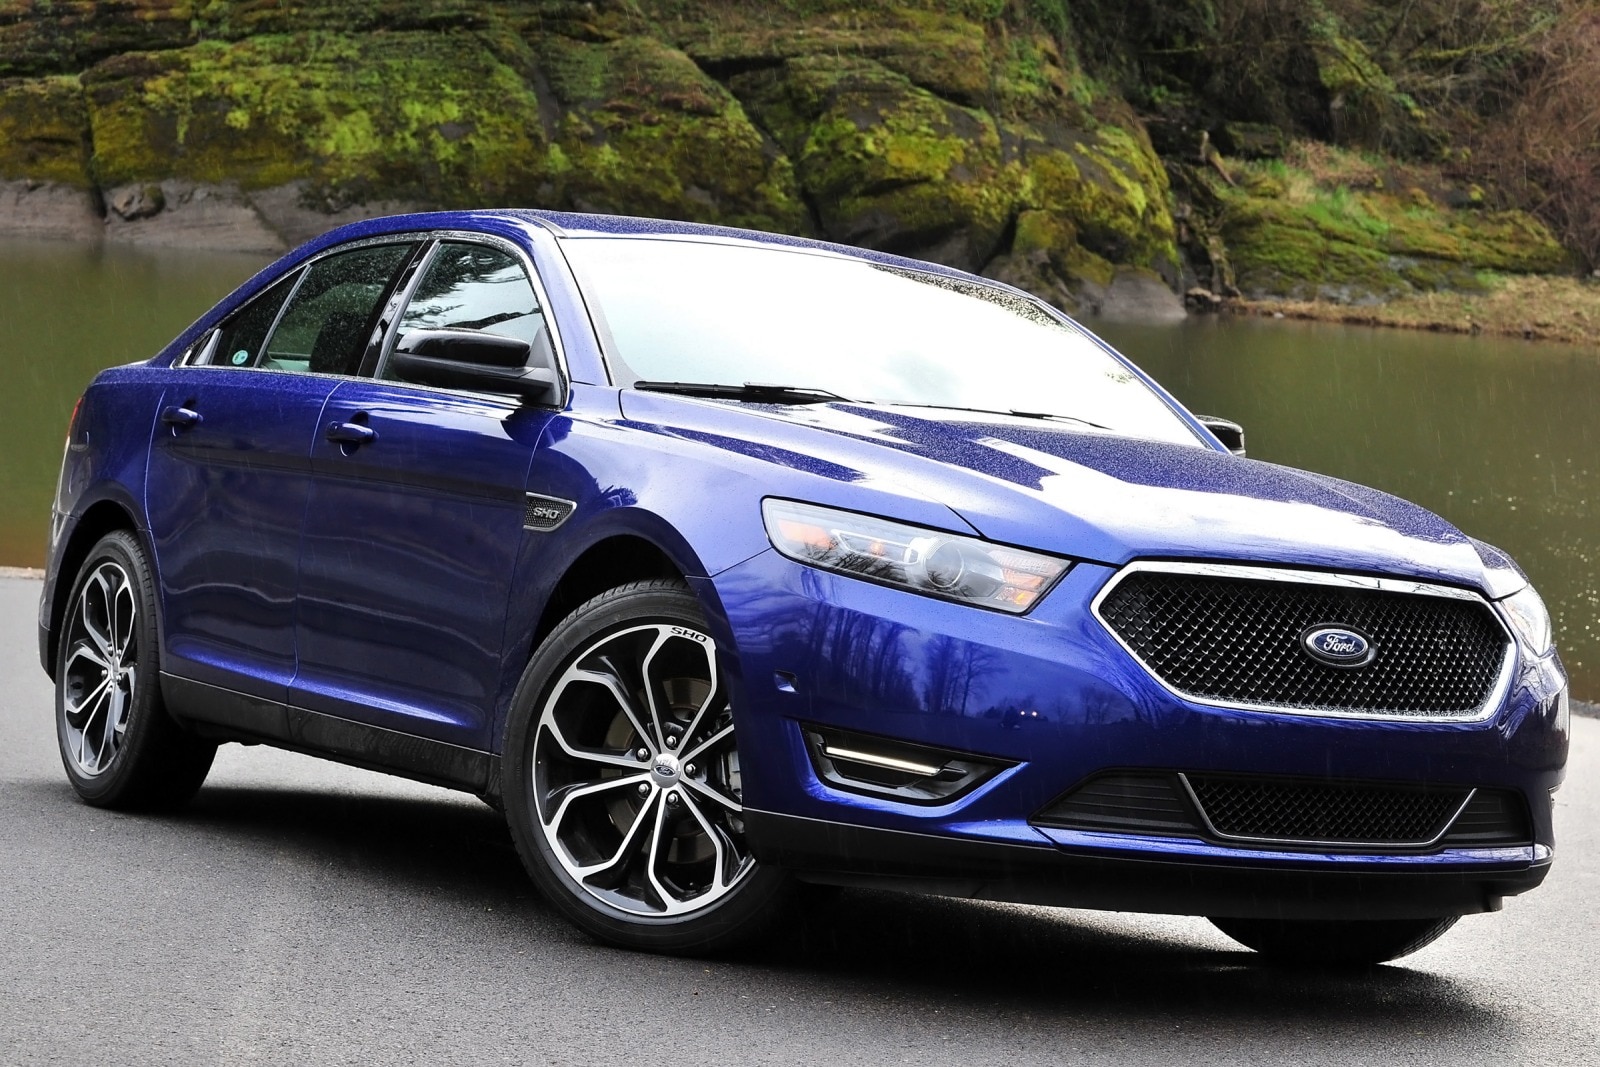 Used 2016 Ford Taurus SHO Review | Edmunds